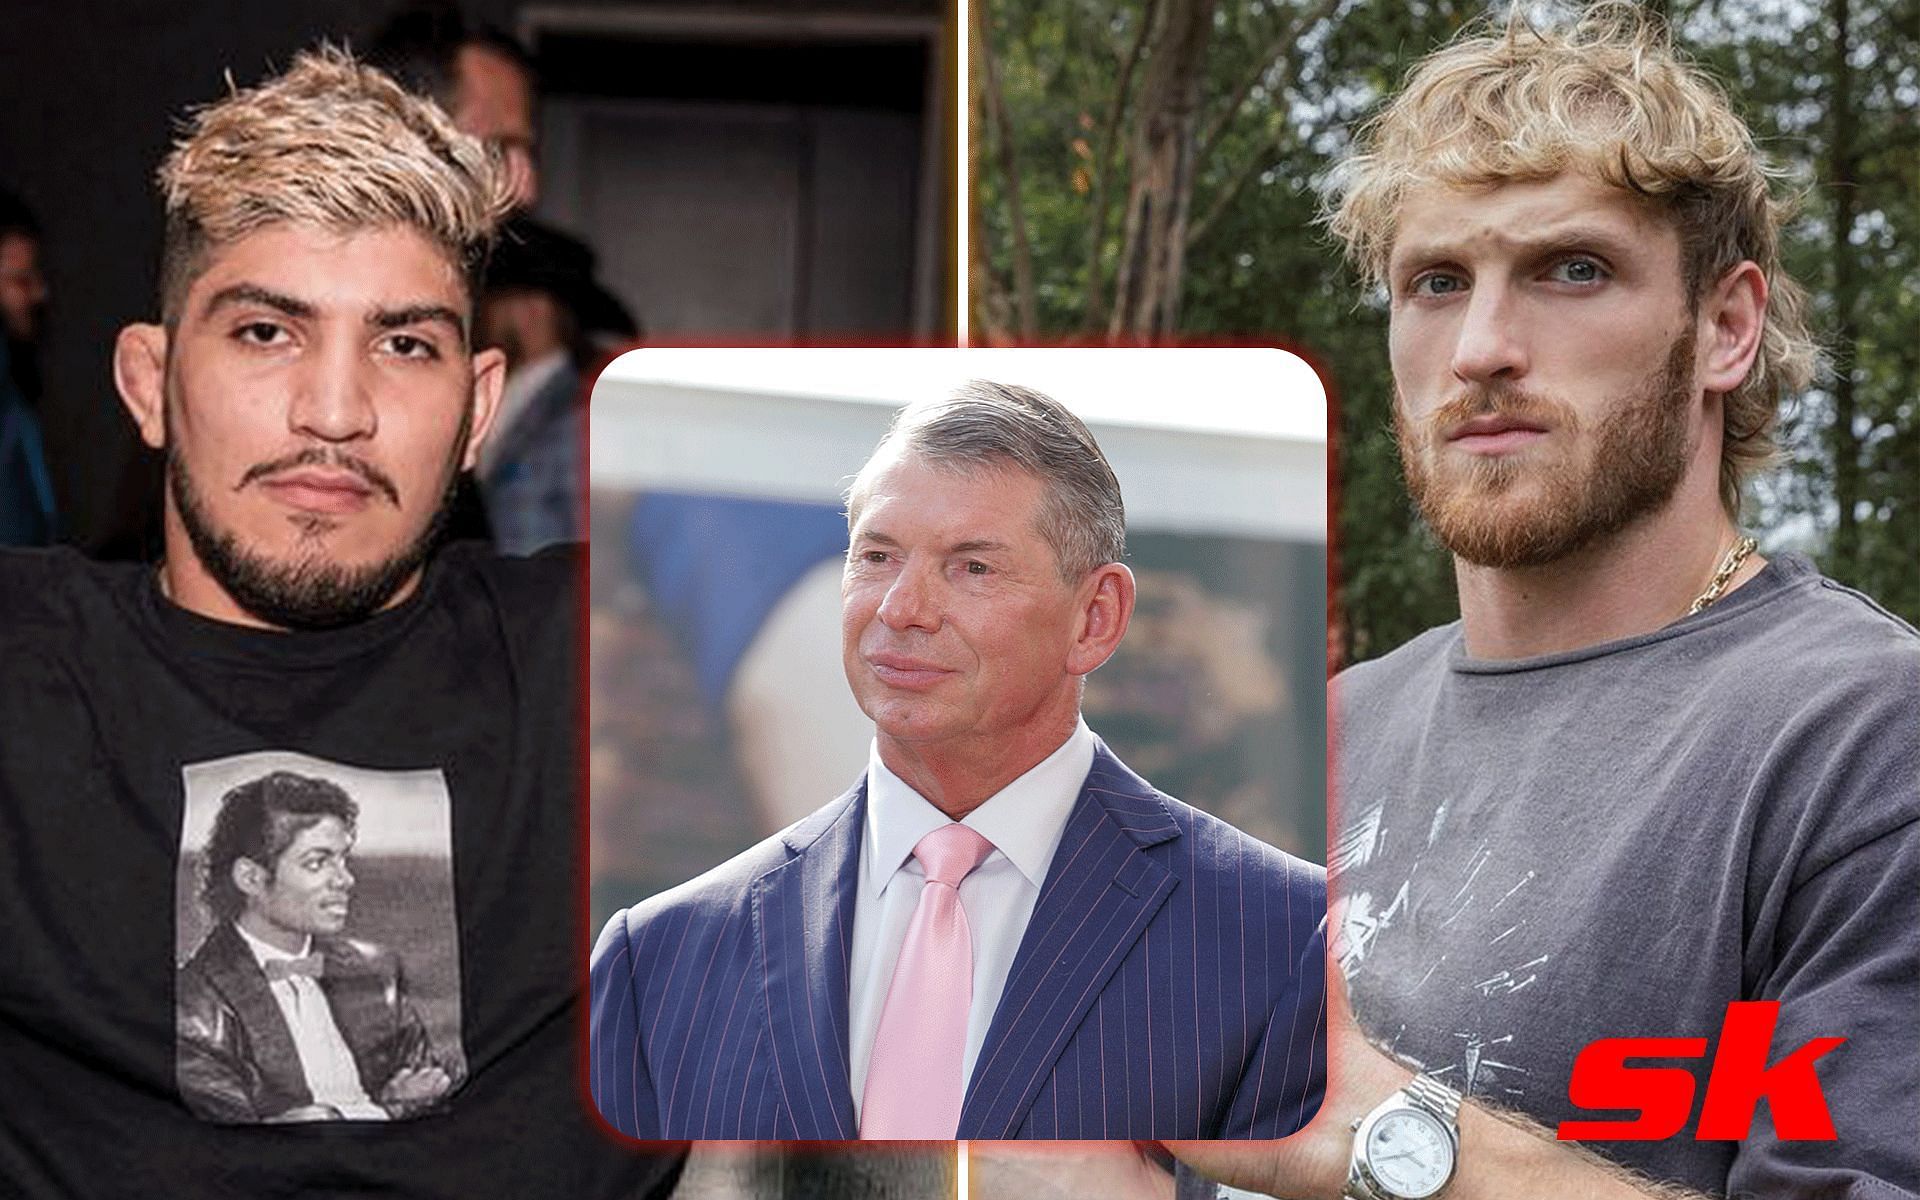 Dillon Danis (Left), Vince McMahon (Inset) and Logan Paul (Right) [Images via: @dillondanis and @loganpaul on Instagram]